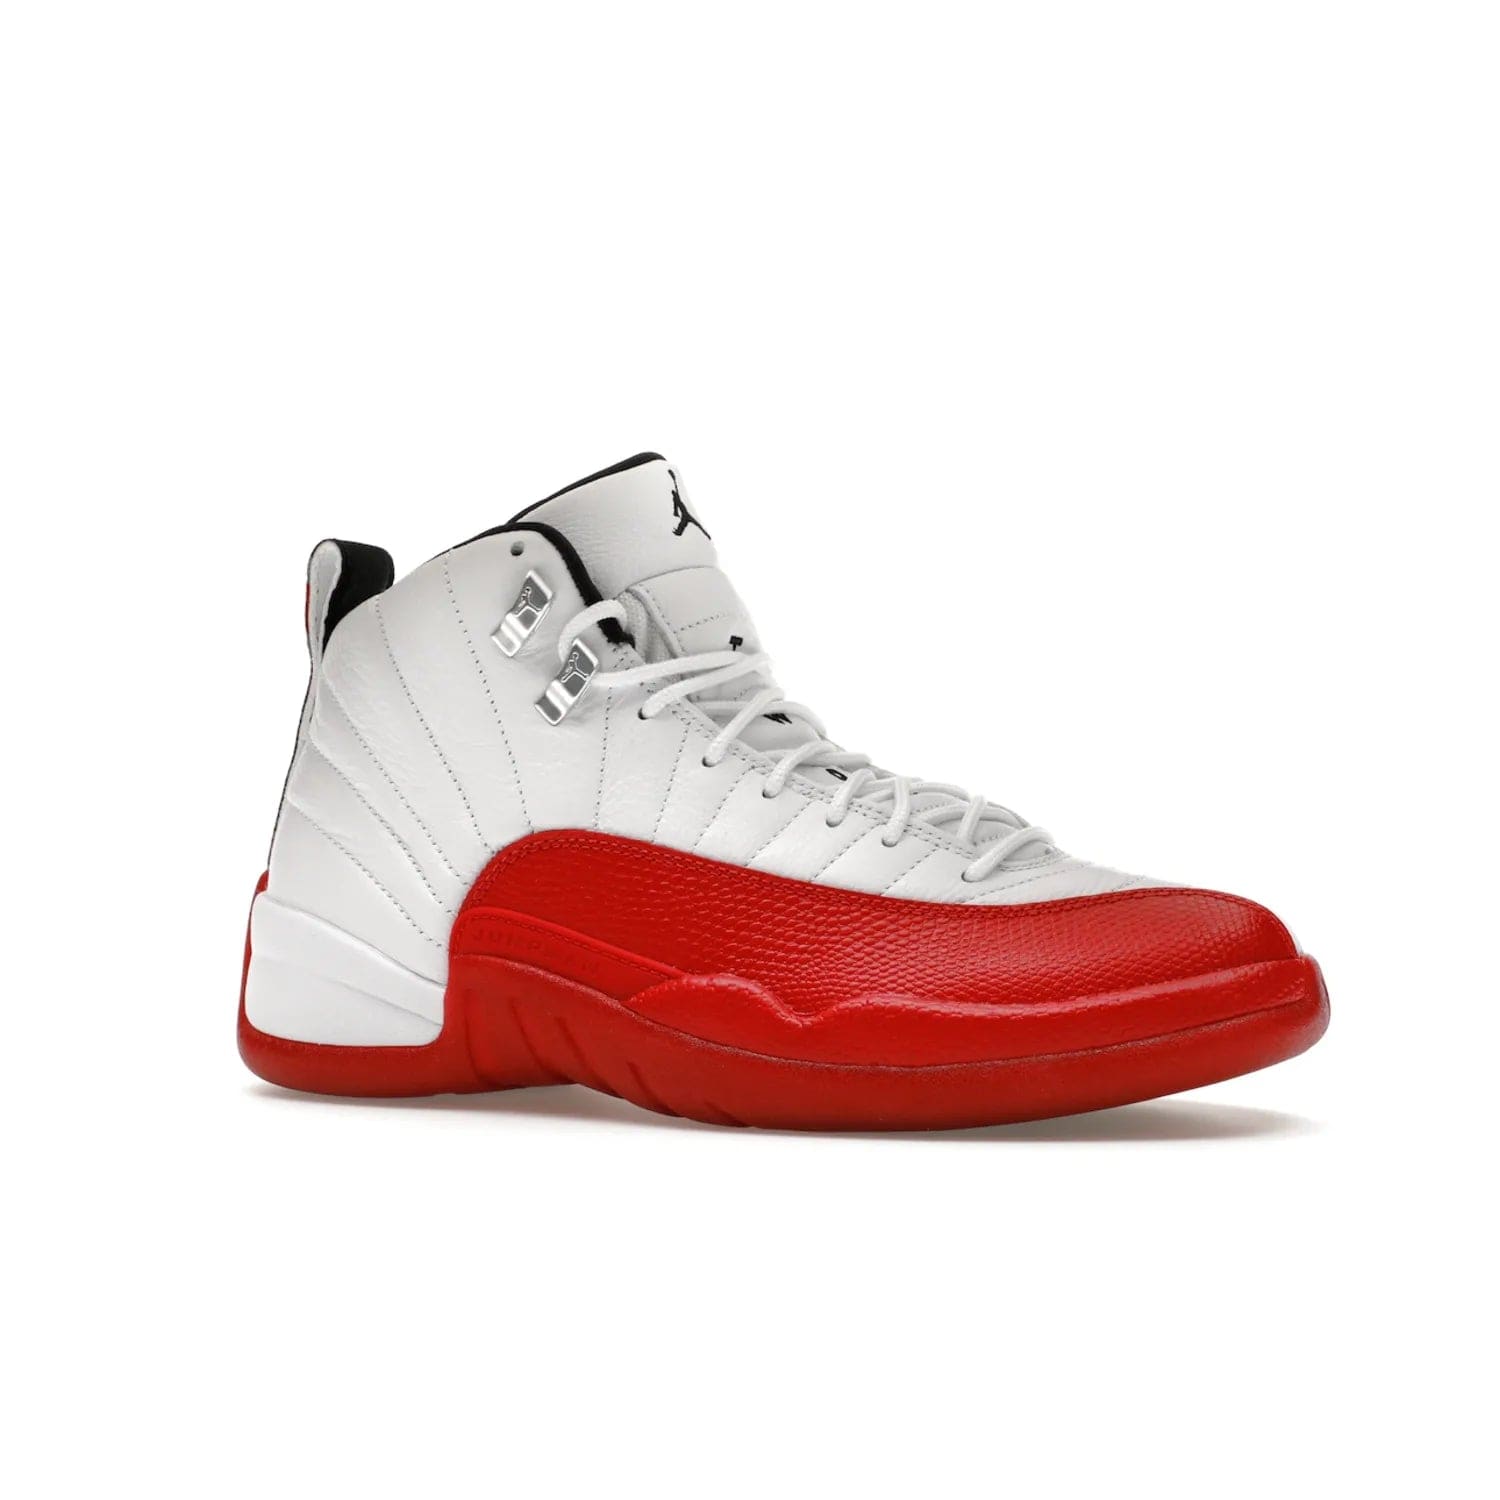 Jordan 12 Retro Cherry (2023) - Image 3 - Only at www.BallersClubKickz.com - Live your sneaker legend with the Jordan 12 Retro Cherry. Iconic pebbled leather mudguards, quilted uppers, and varsity red accents make this 1997 classic a must-have for 2023. Shine on with silver hardware and matching midsoles, and bring it all together for limited-edition style on October 28th. Step into Jordan legacy with the Retro Cherry.